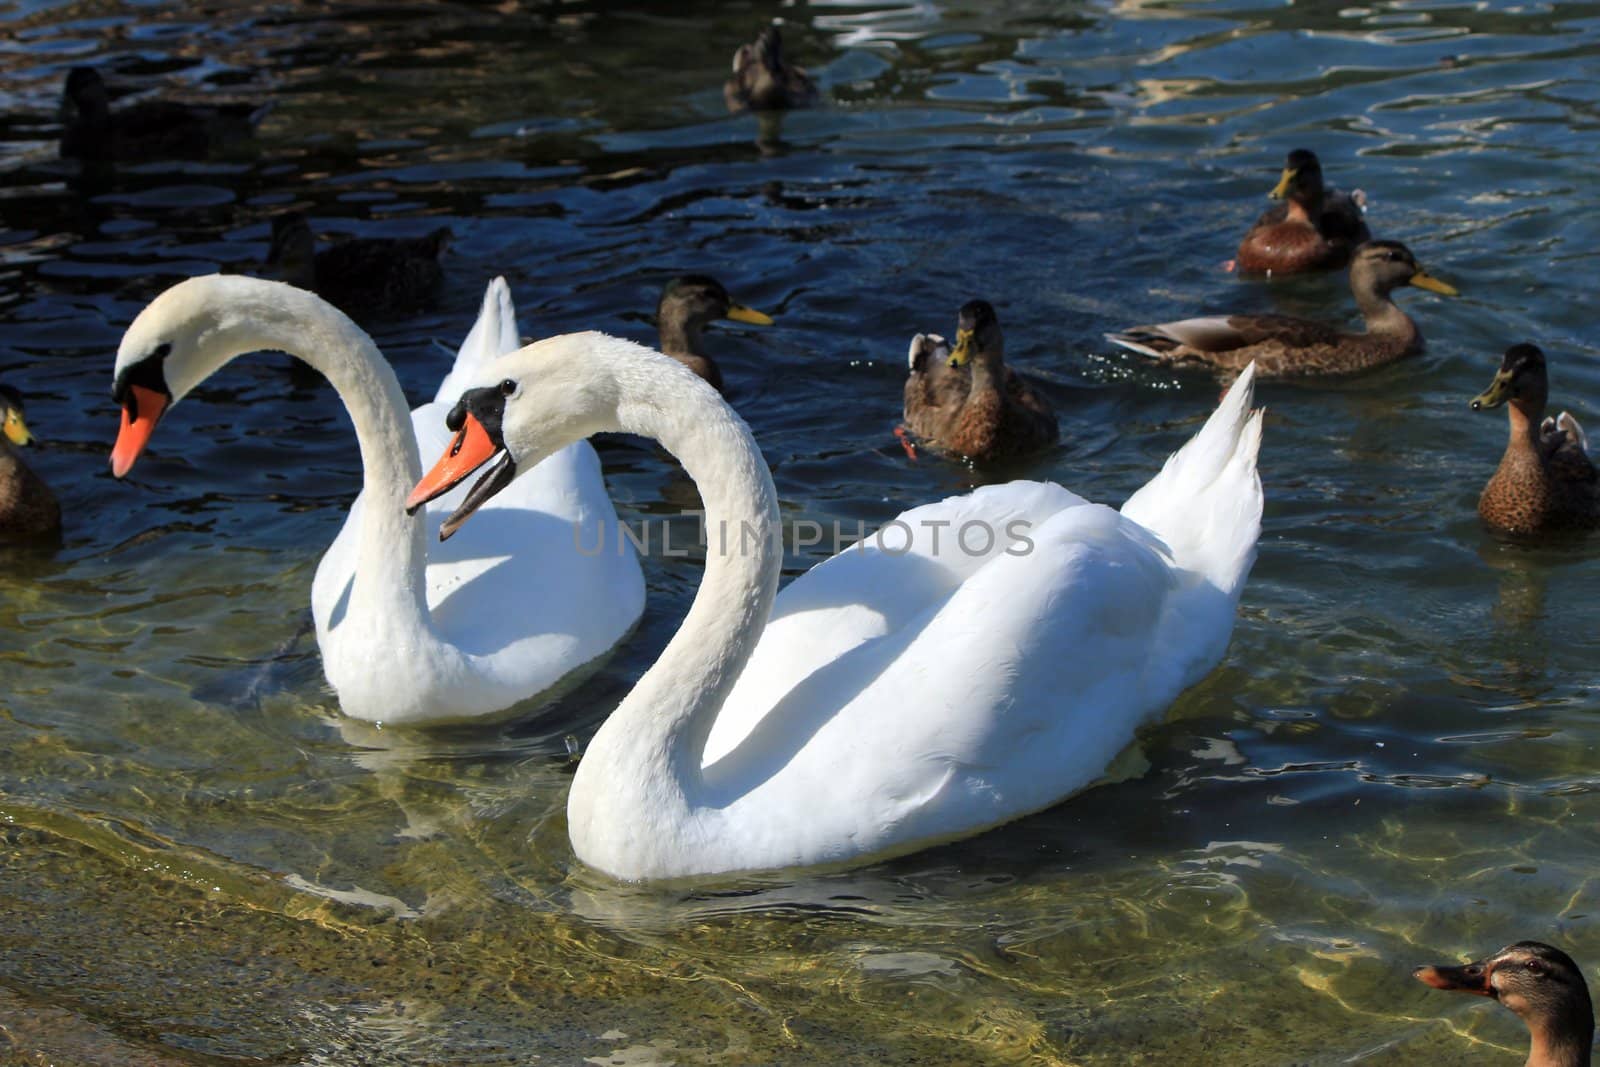 Beautiful white swan with wings and mouth open to express it is angry among ducks and next to another swan